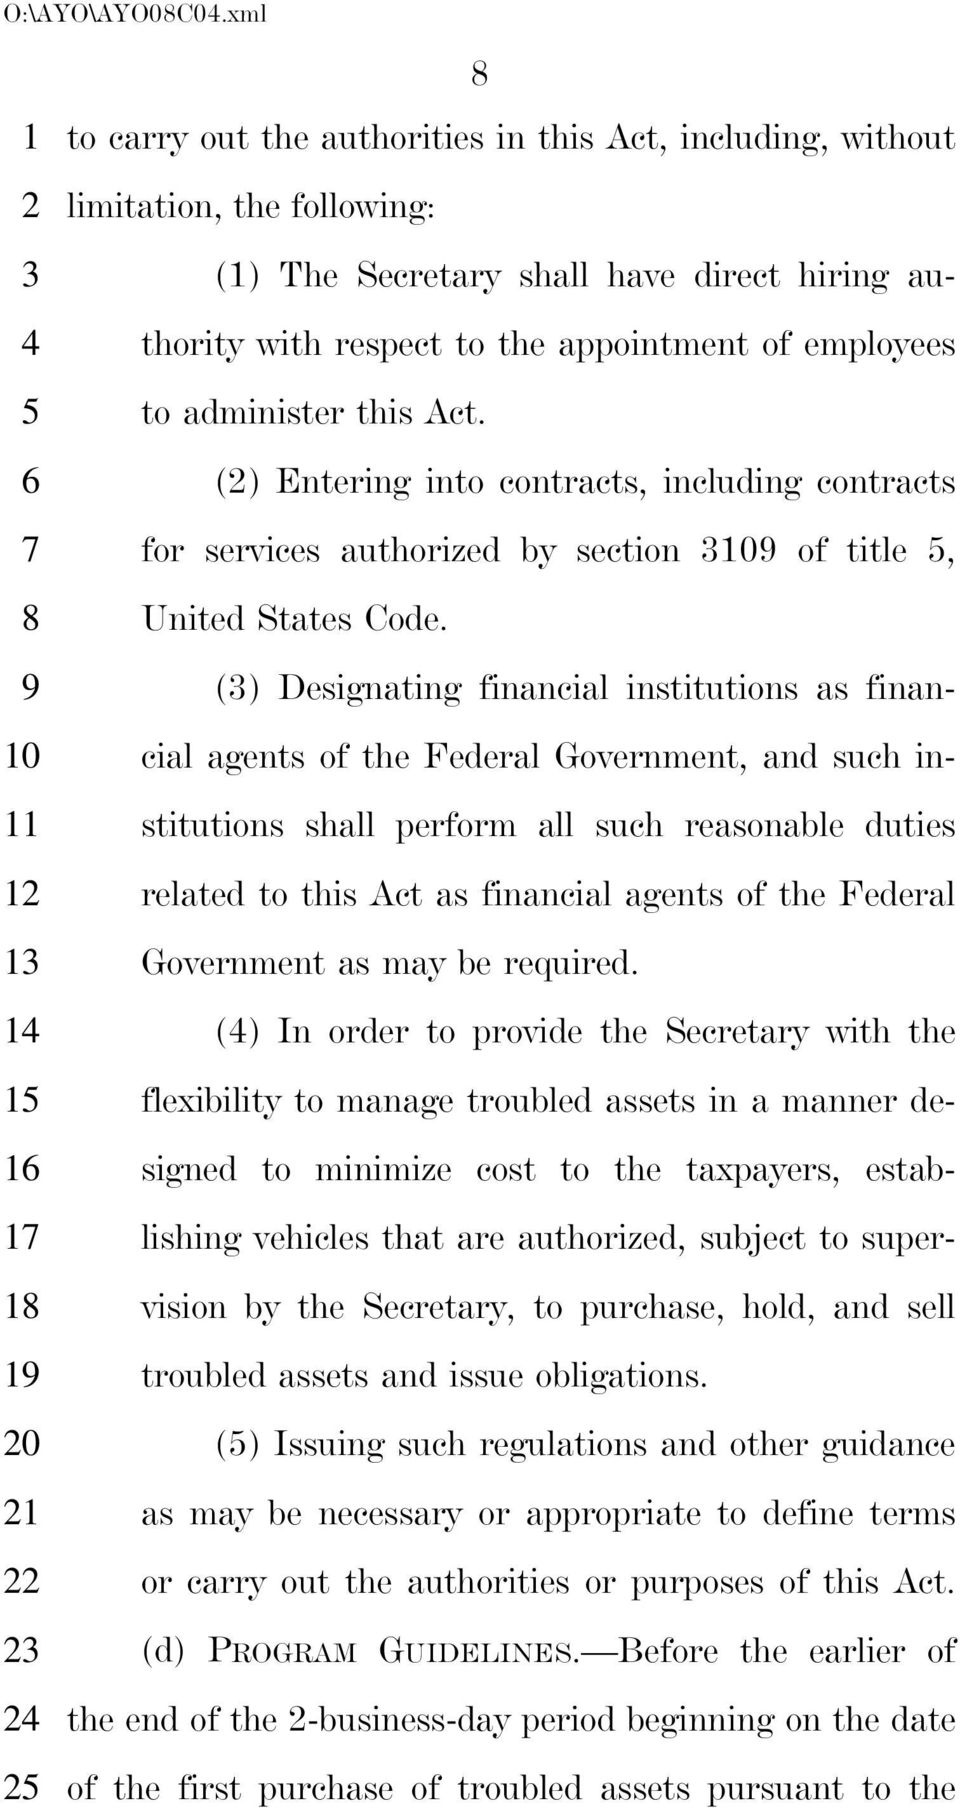 () Designating financial institutions as financial agents of the Federal Government, and such institutions shall perform all such reasonable duties related to this Act as financial agents of the